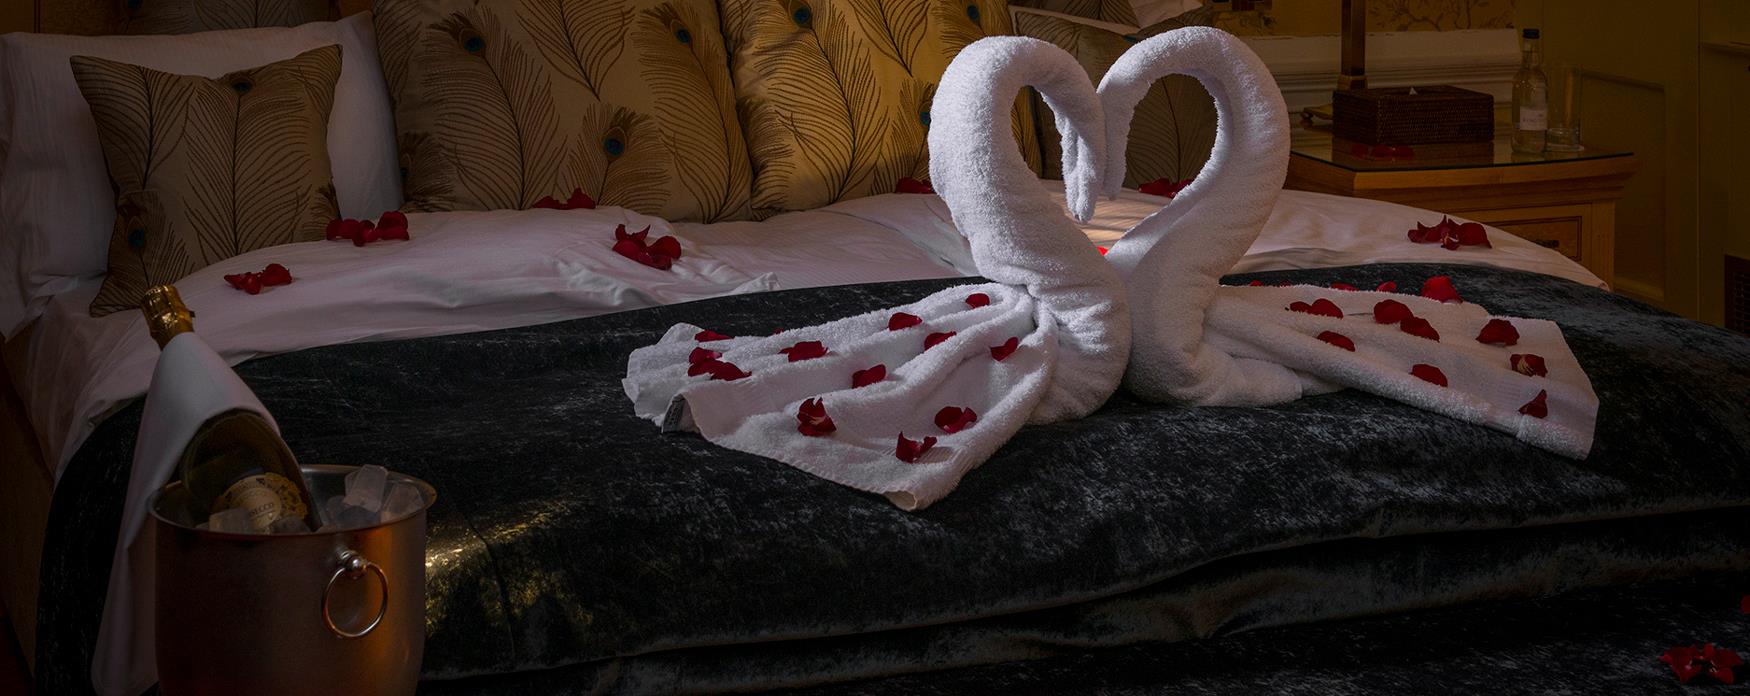 romantic bed laid out with petals and swan towels arrangement